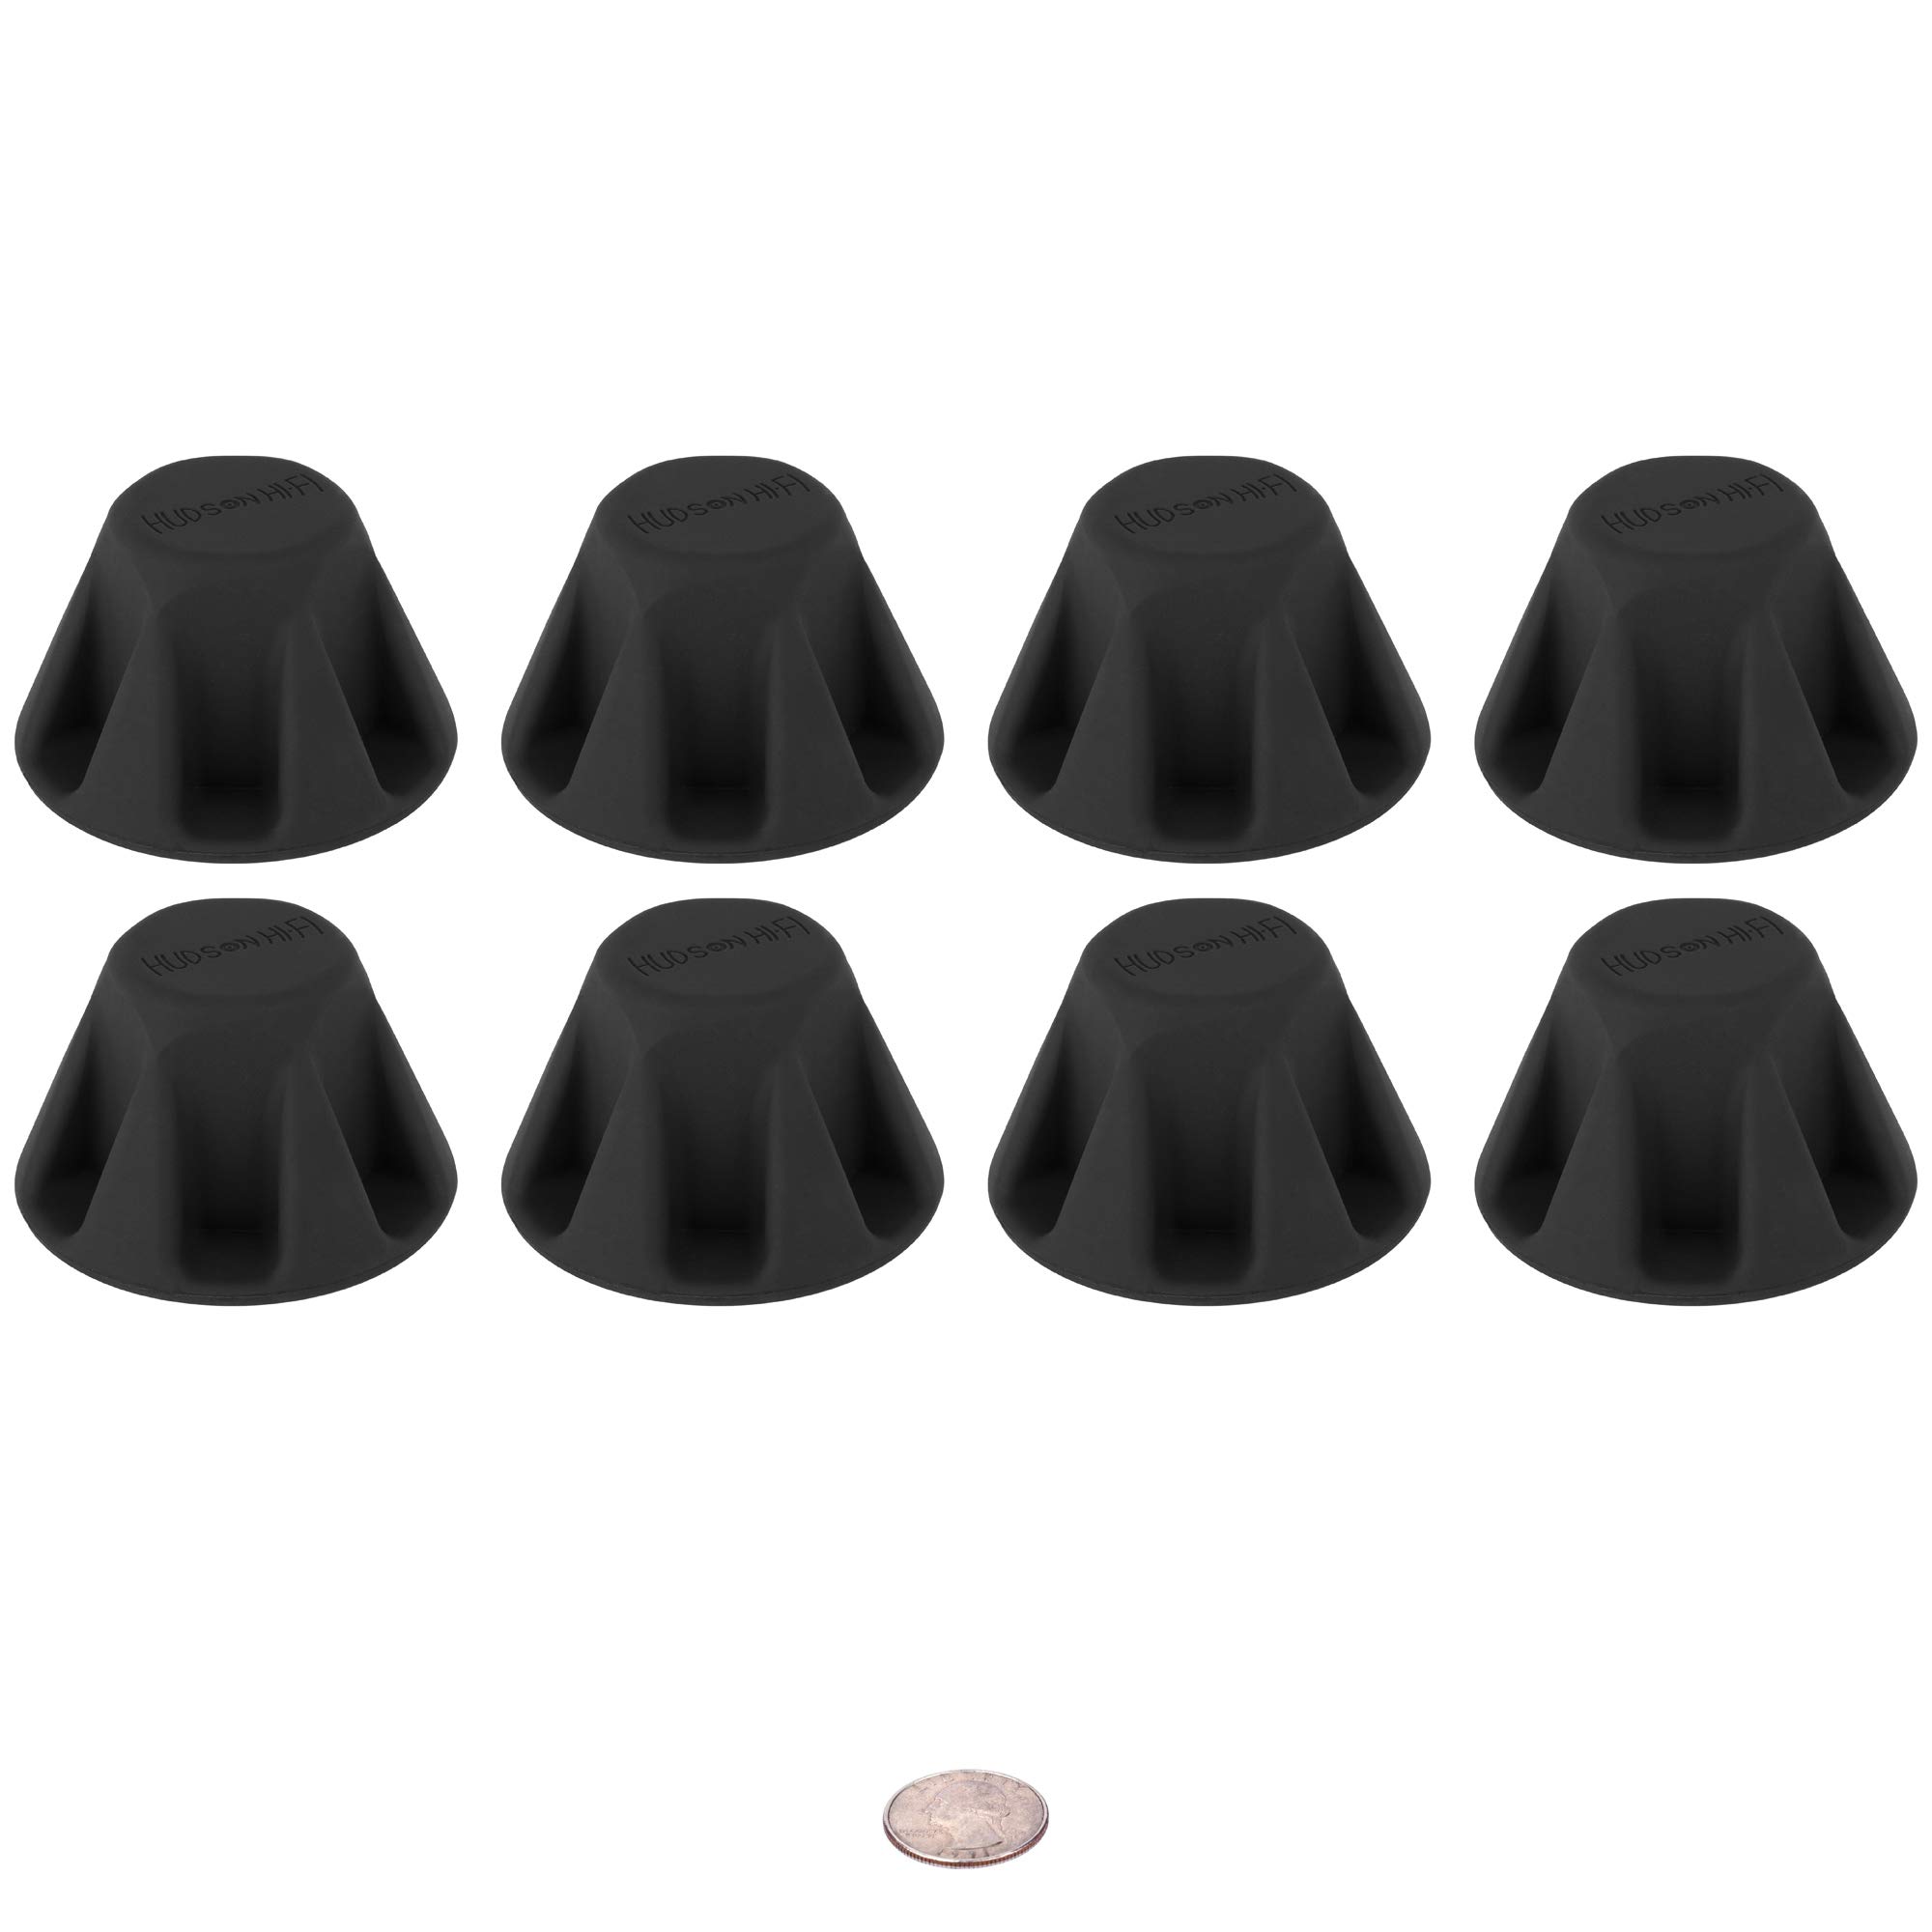 1.5” Bigfoot Isolation Feet - Non Adhesive Rubber Stoppers - 8 Pack Non-Skid Rubber Bumpers for Turntable Isolation - Anti Vibration Pads - 50 Duro